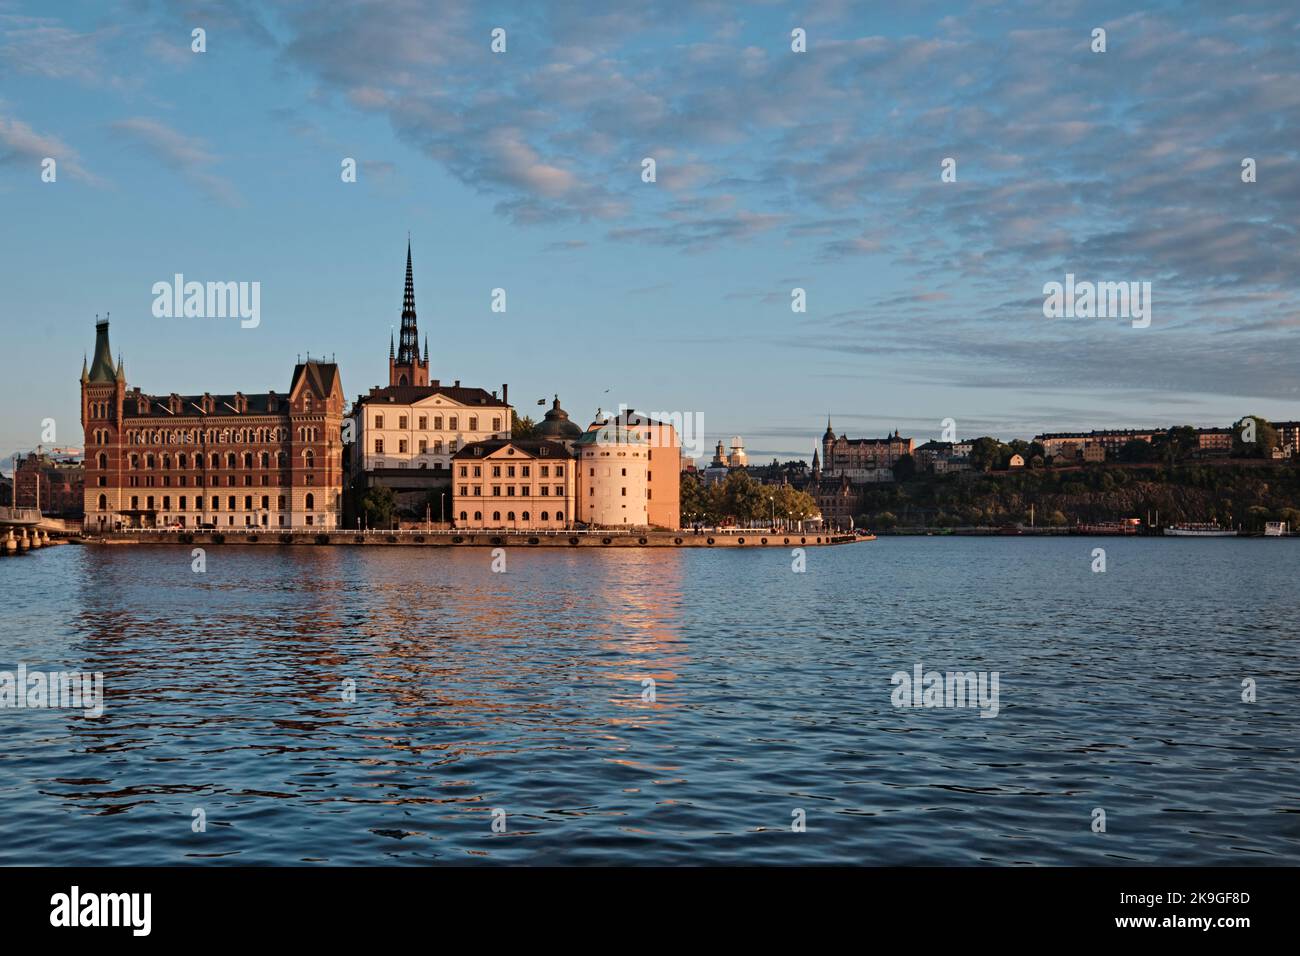 Stockholm, Sweden - Sept 2022: Riddarholm Church (Riddarholmskyrkan), Riddarholmen island and the old town at sunset skyline view from town hall water Stock Photo